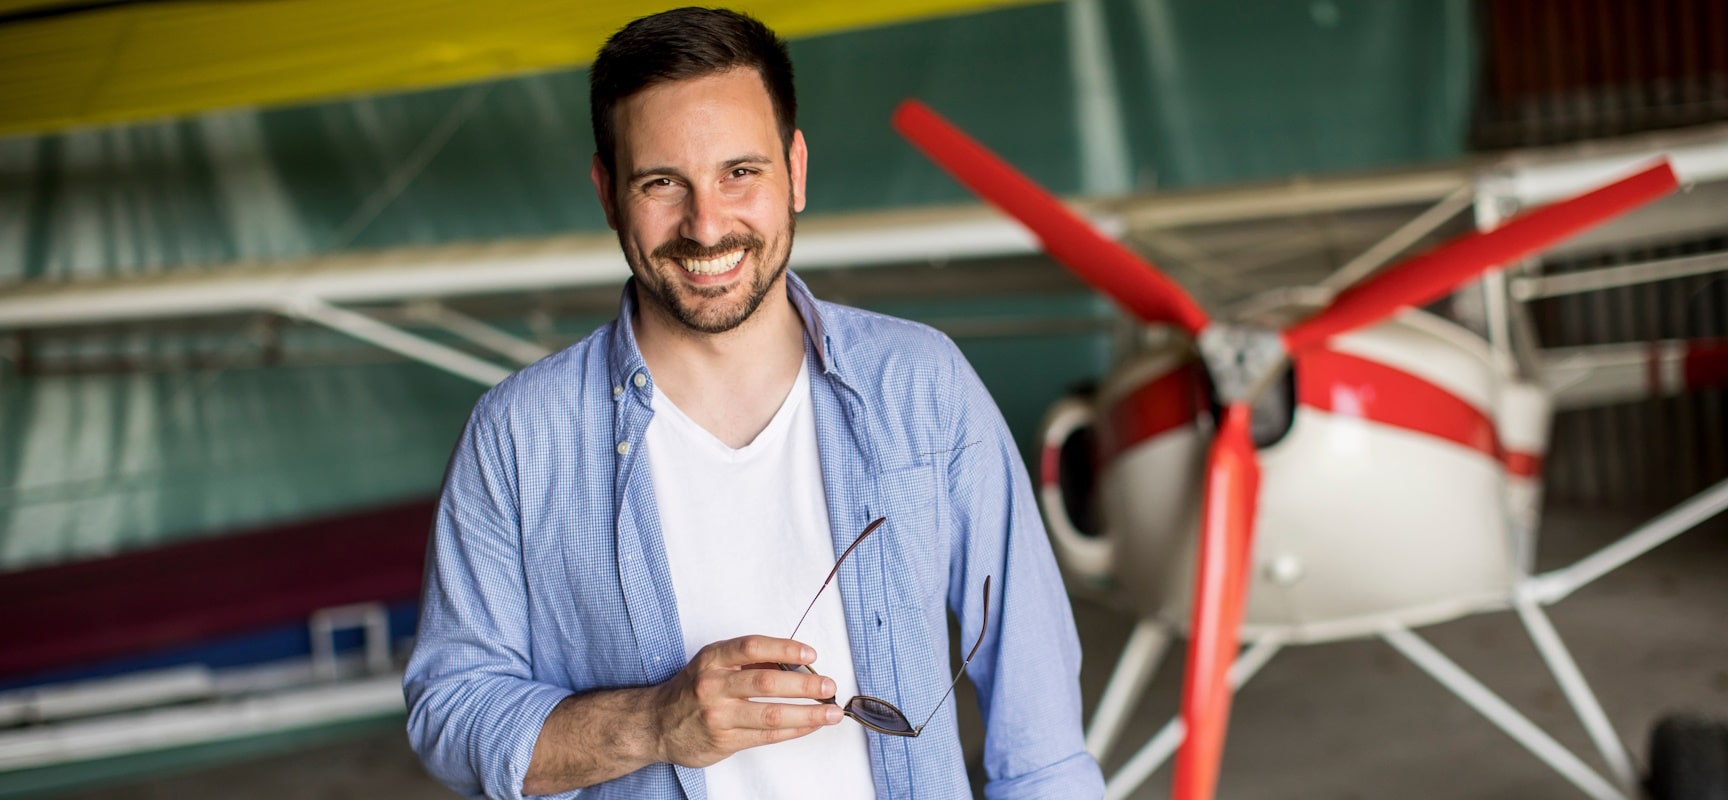 Man smiling in front of plane